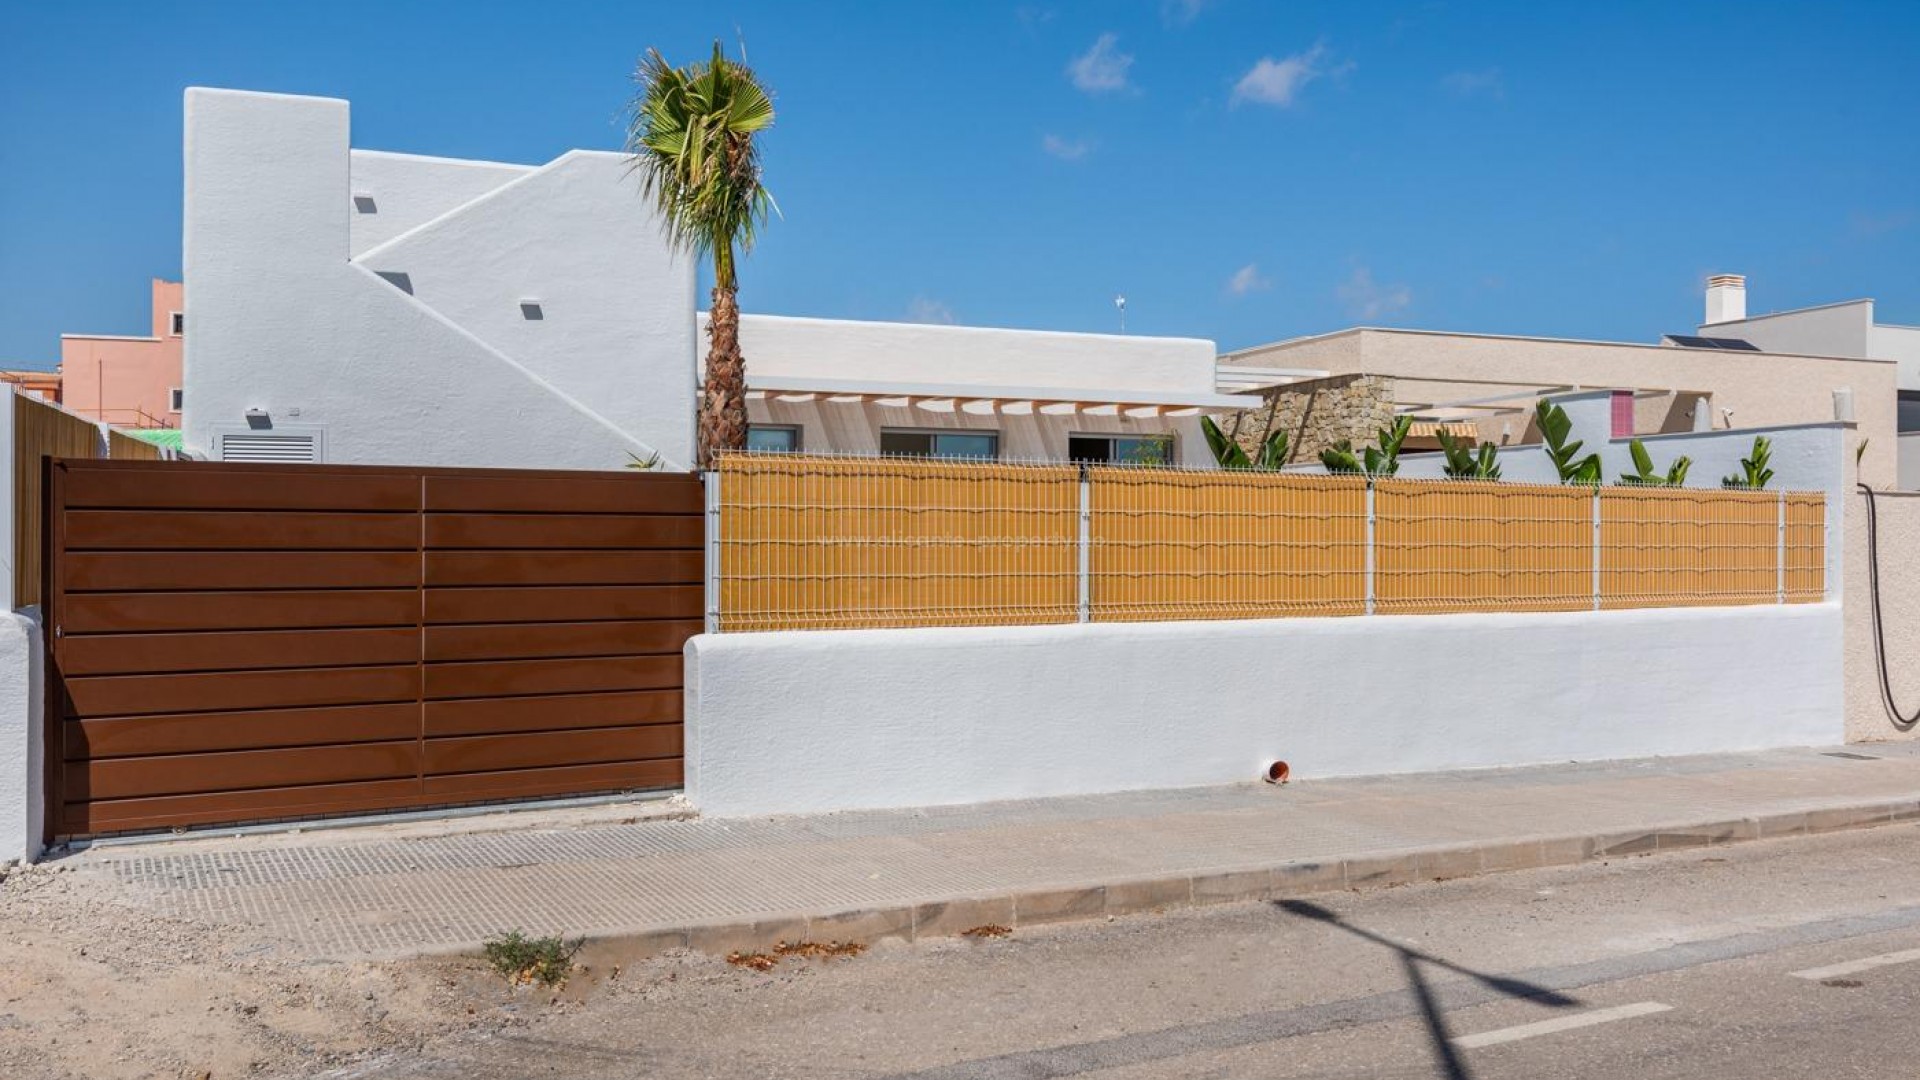 New houses/villas in Benijofar, 3 bedrooms, 2 bathrooms, private garden w/pool and terrace, a fantastic solarium with fantastic views, parking space